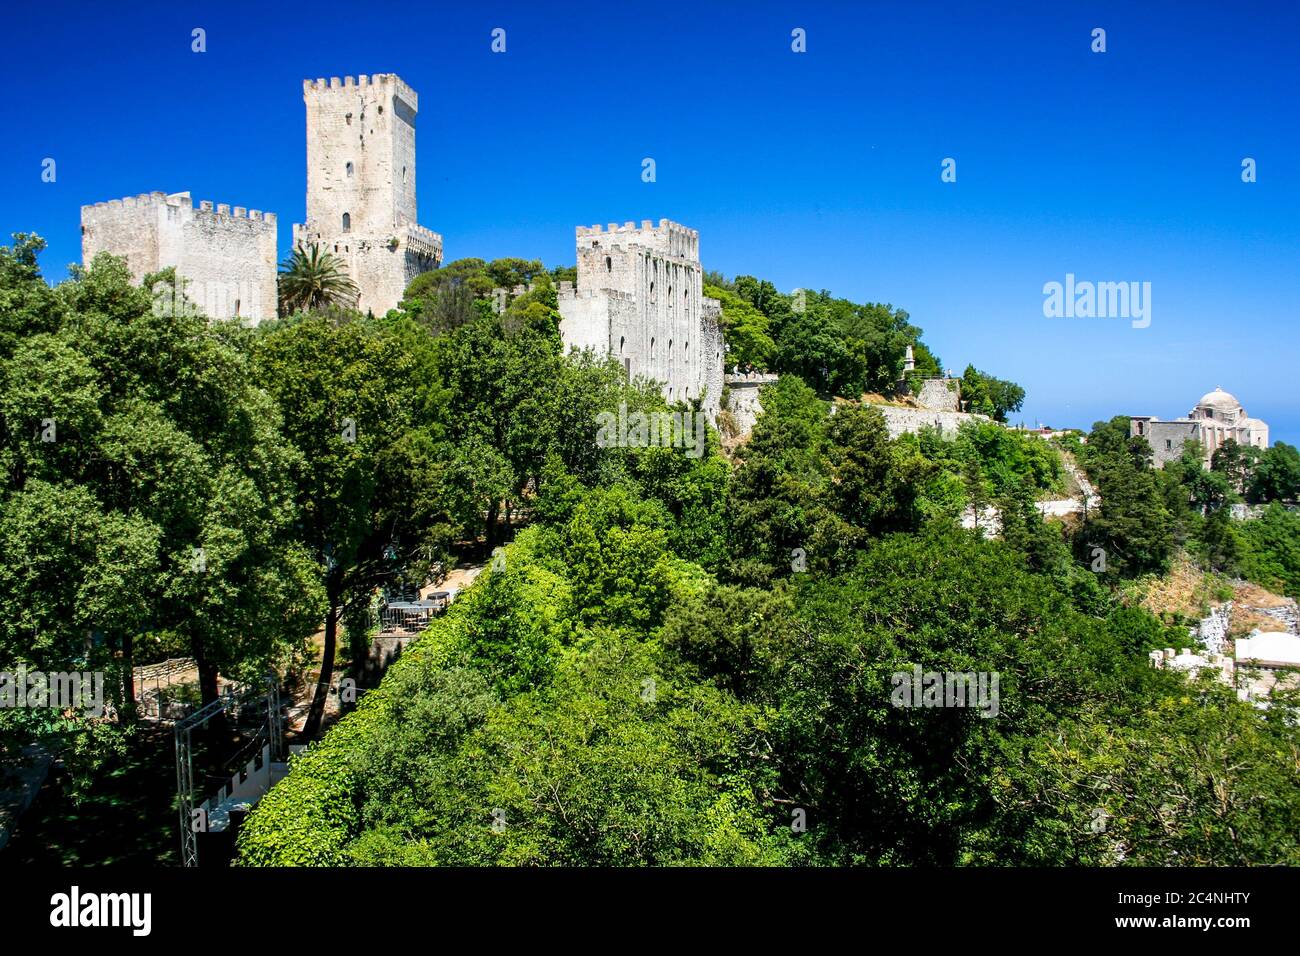 Duomo Di Erice High Resolution Stock Photography and Images - Alamy